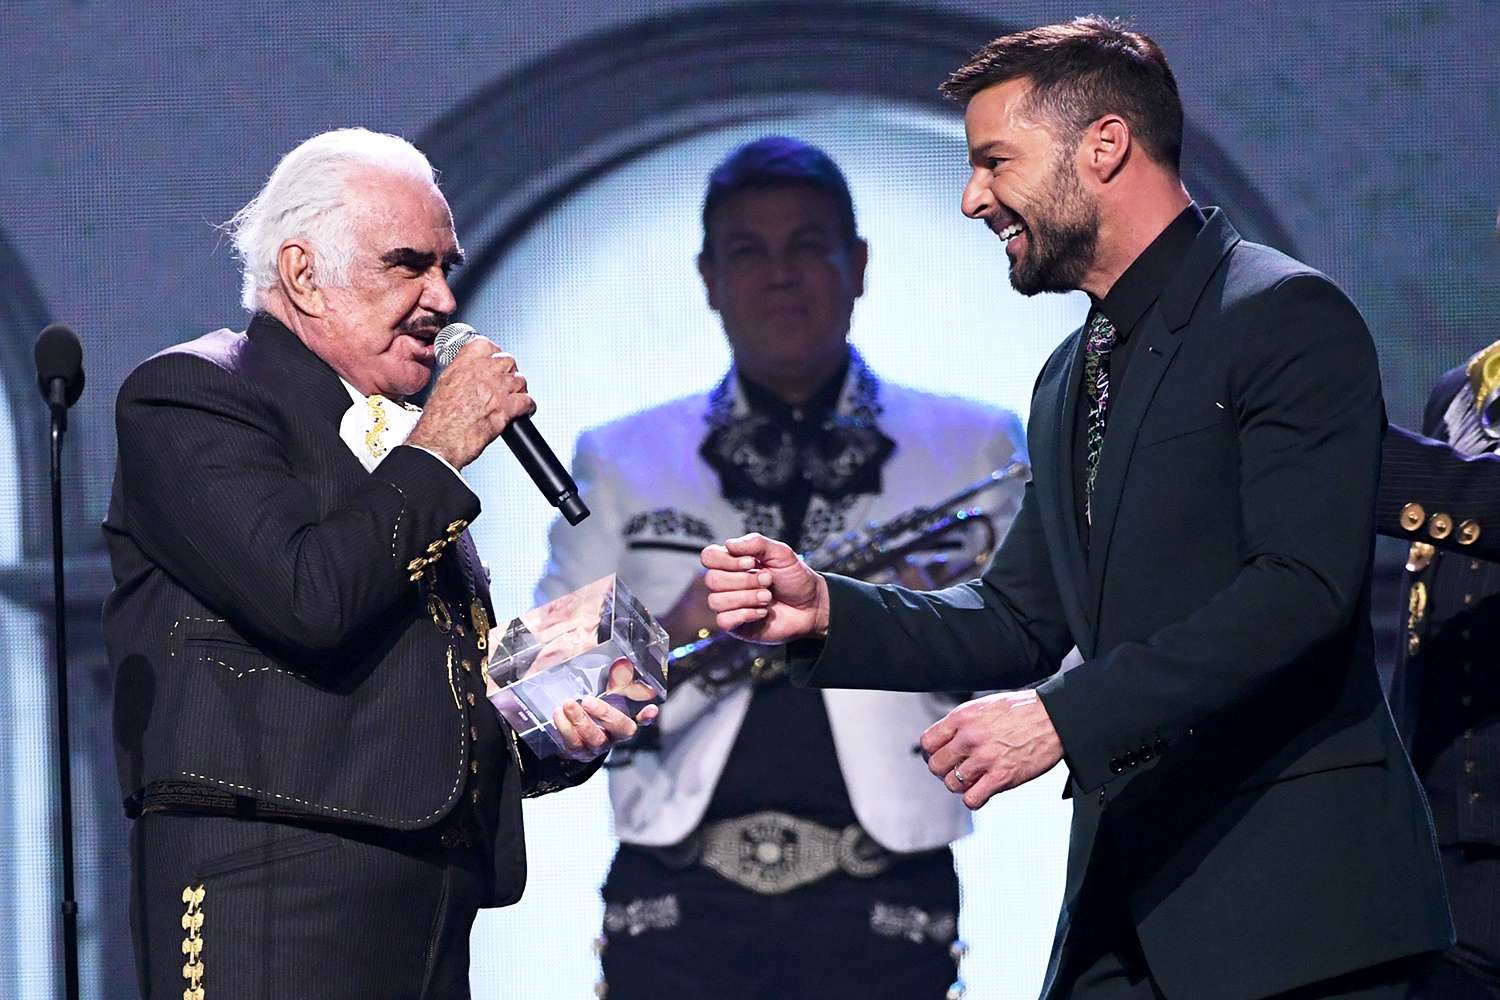 Vicente Fernández accepts his special award from Ricky Martin performs onstage during the 20th annual Latin GRAMMY Awards at MGM Grand Garden Arena on November 14, 2019 in Las Vegas, Nevada.